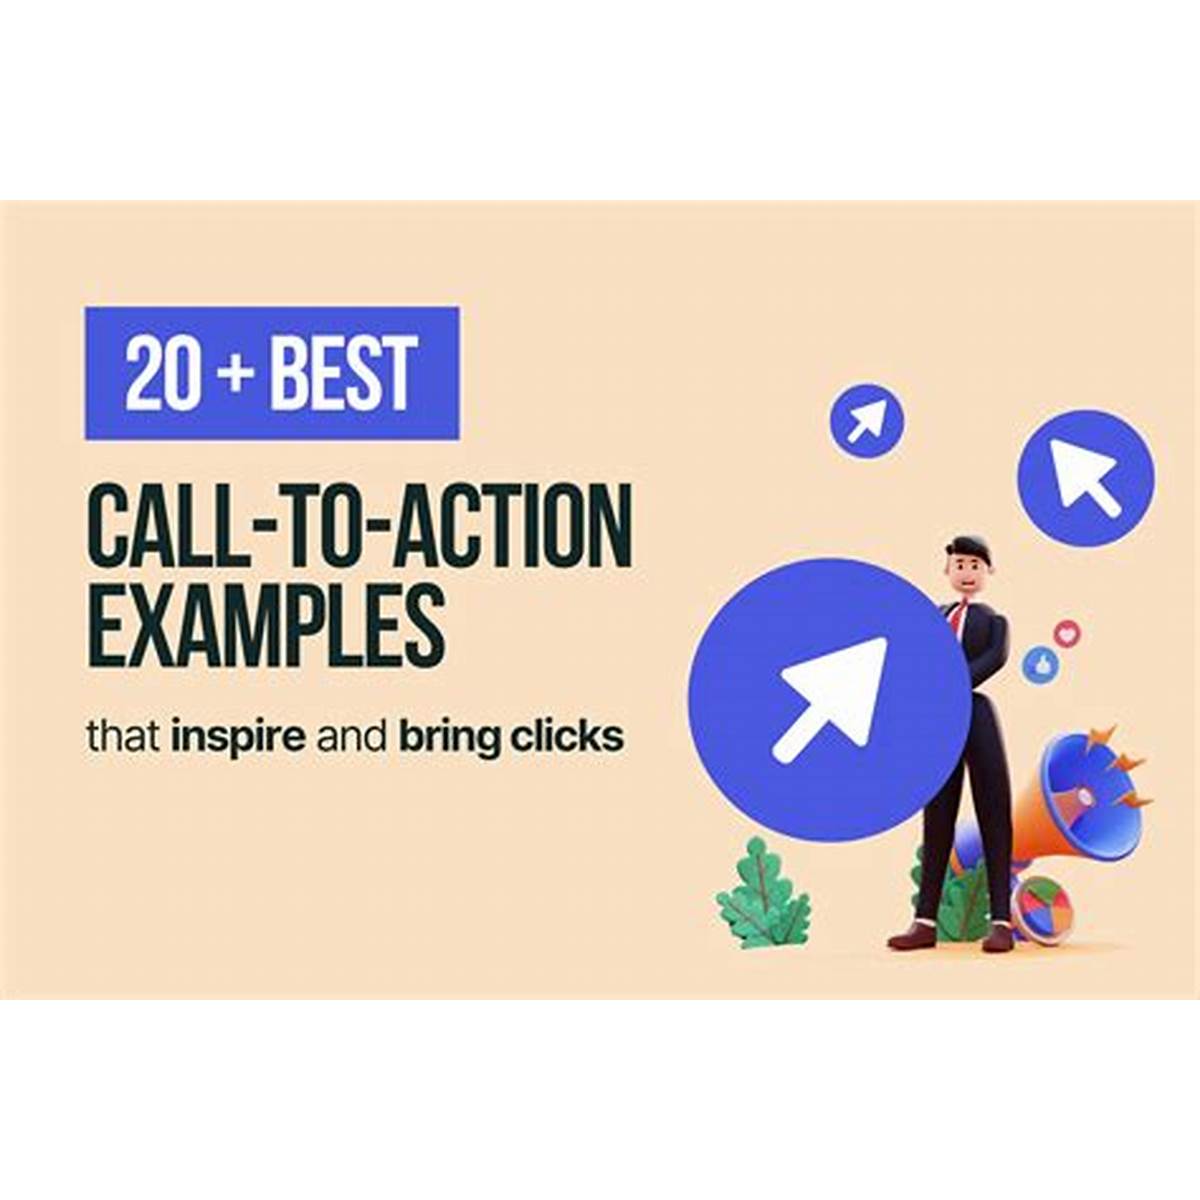 Calls to Action on websites